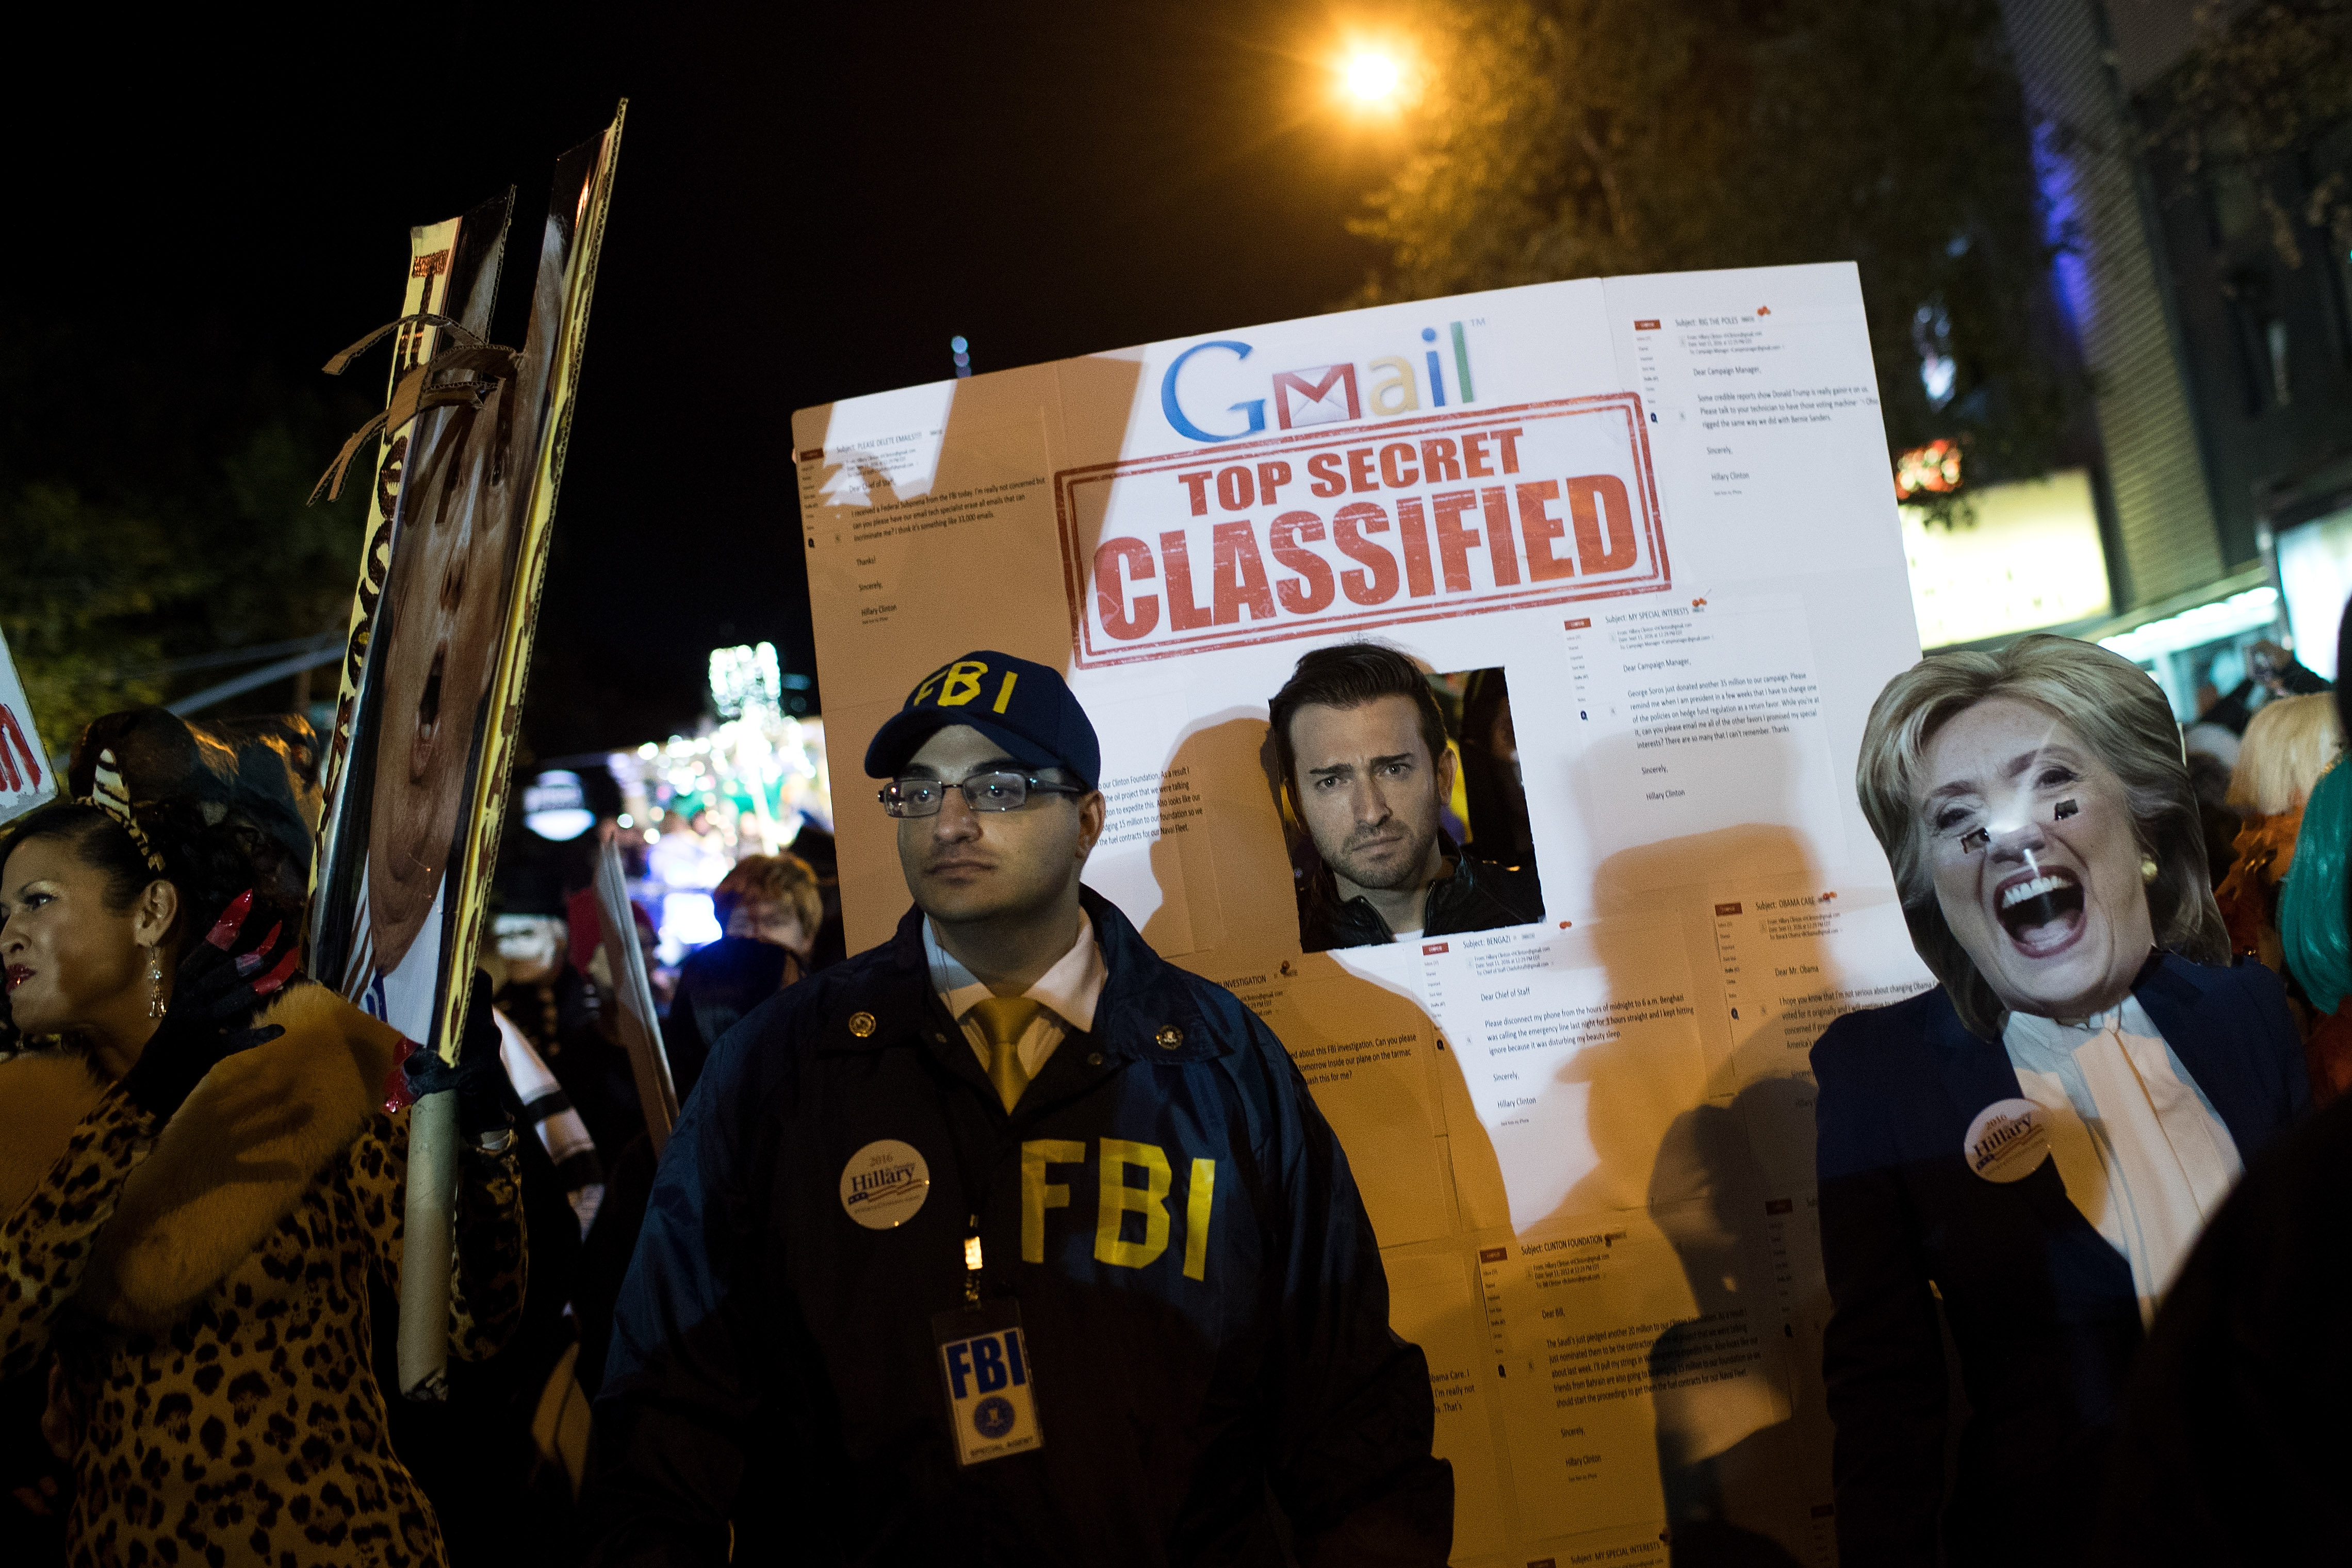 A group dressed as 'Hillary Clinton's emails' walk along Sixth Avenue during the 43rd annual Village Halloween Parade, October 31, 2016 in New York City. Thousands of people are expected to attend as the parade travels up Sixth Avenue through the West Village. (Photo by Drew Angerer/Getty Images)